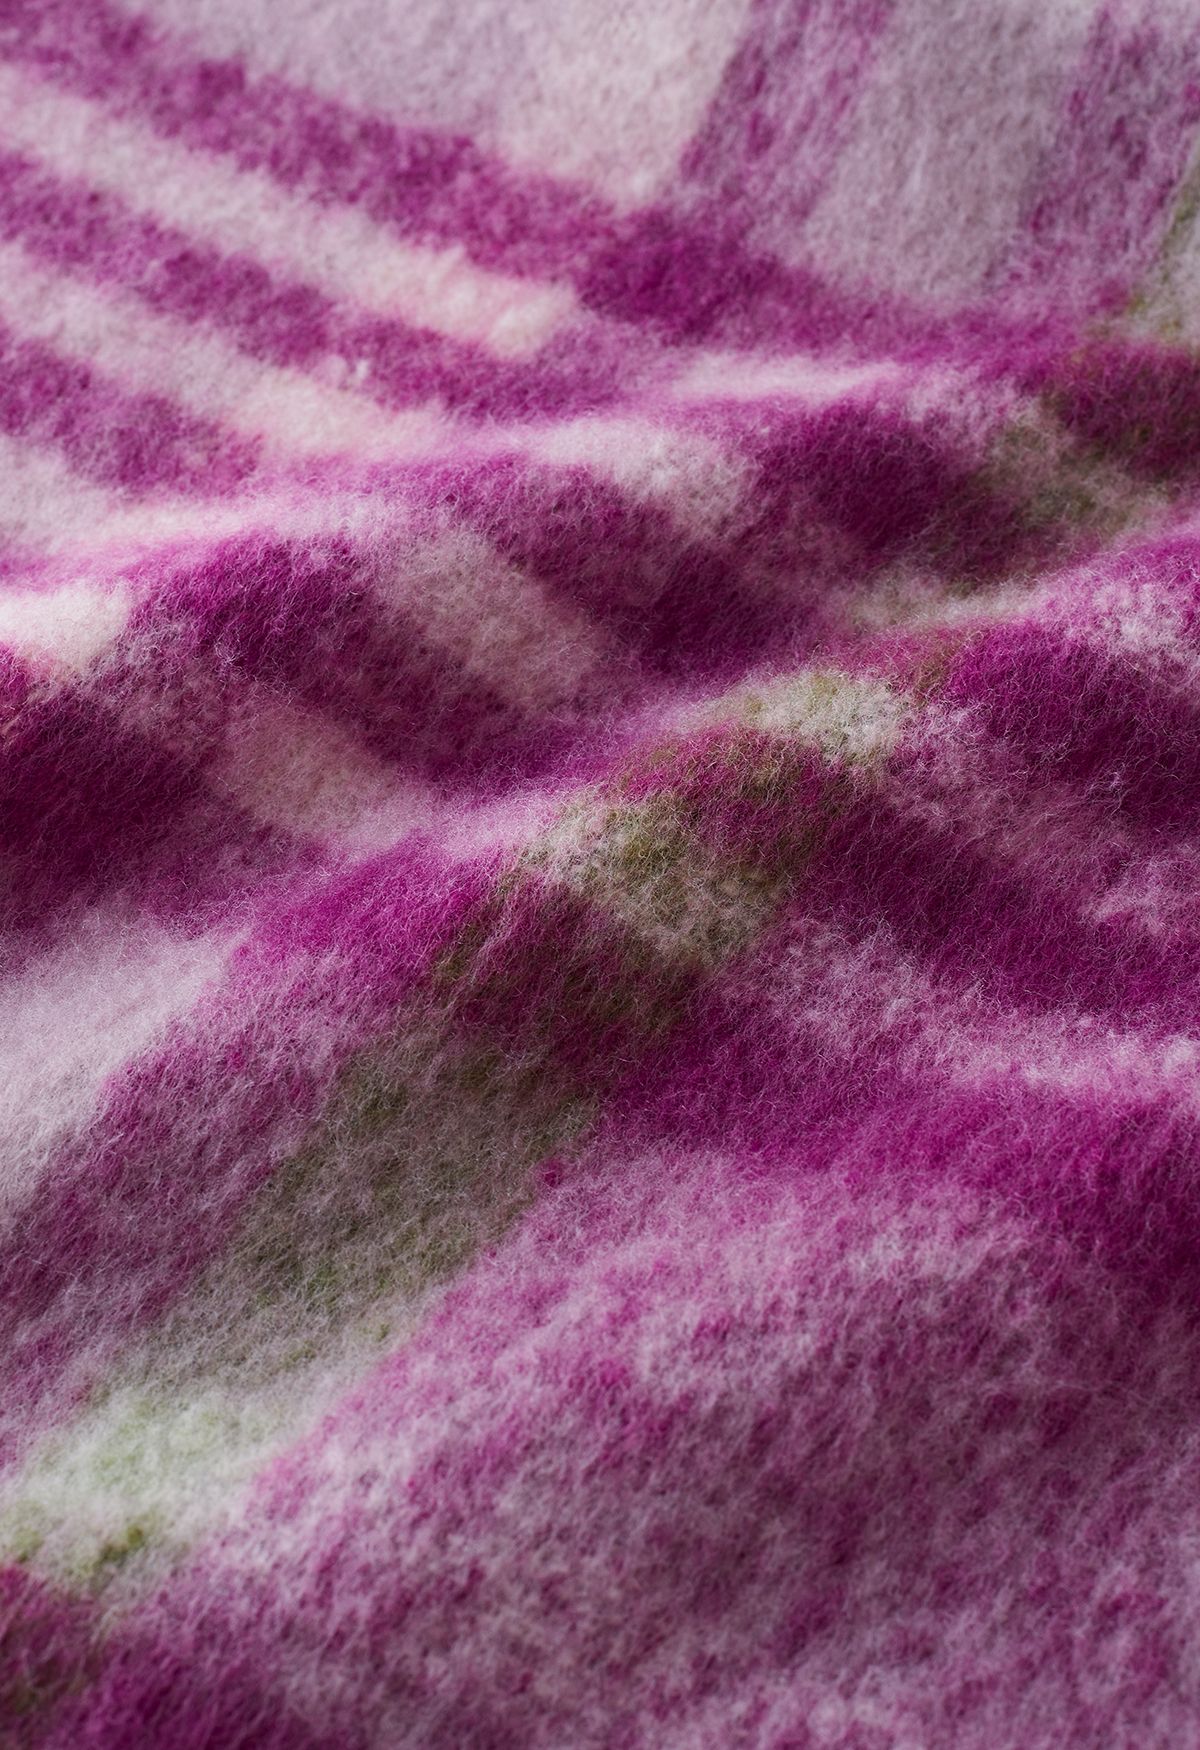 Fuzzy Mohair Plaid Pattern Schal in Pflaume